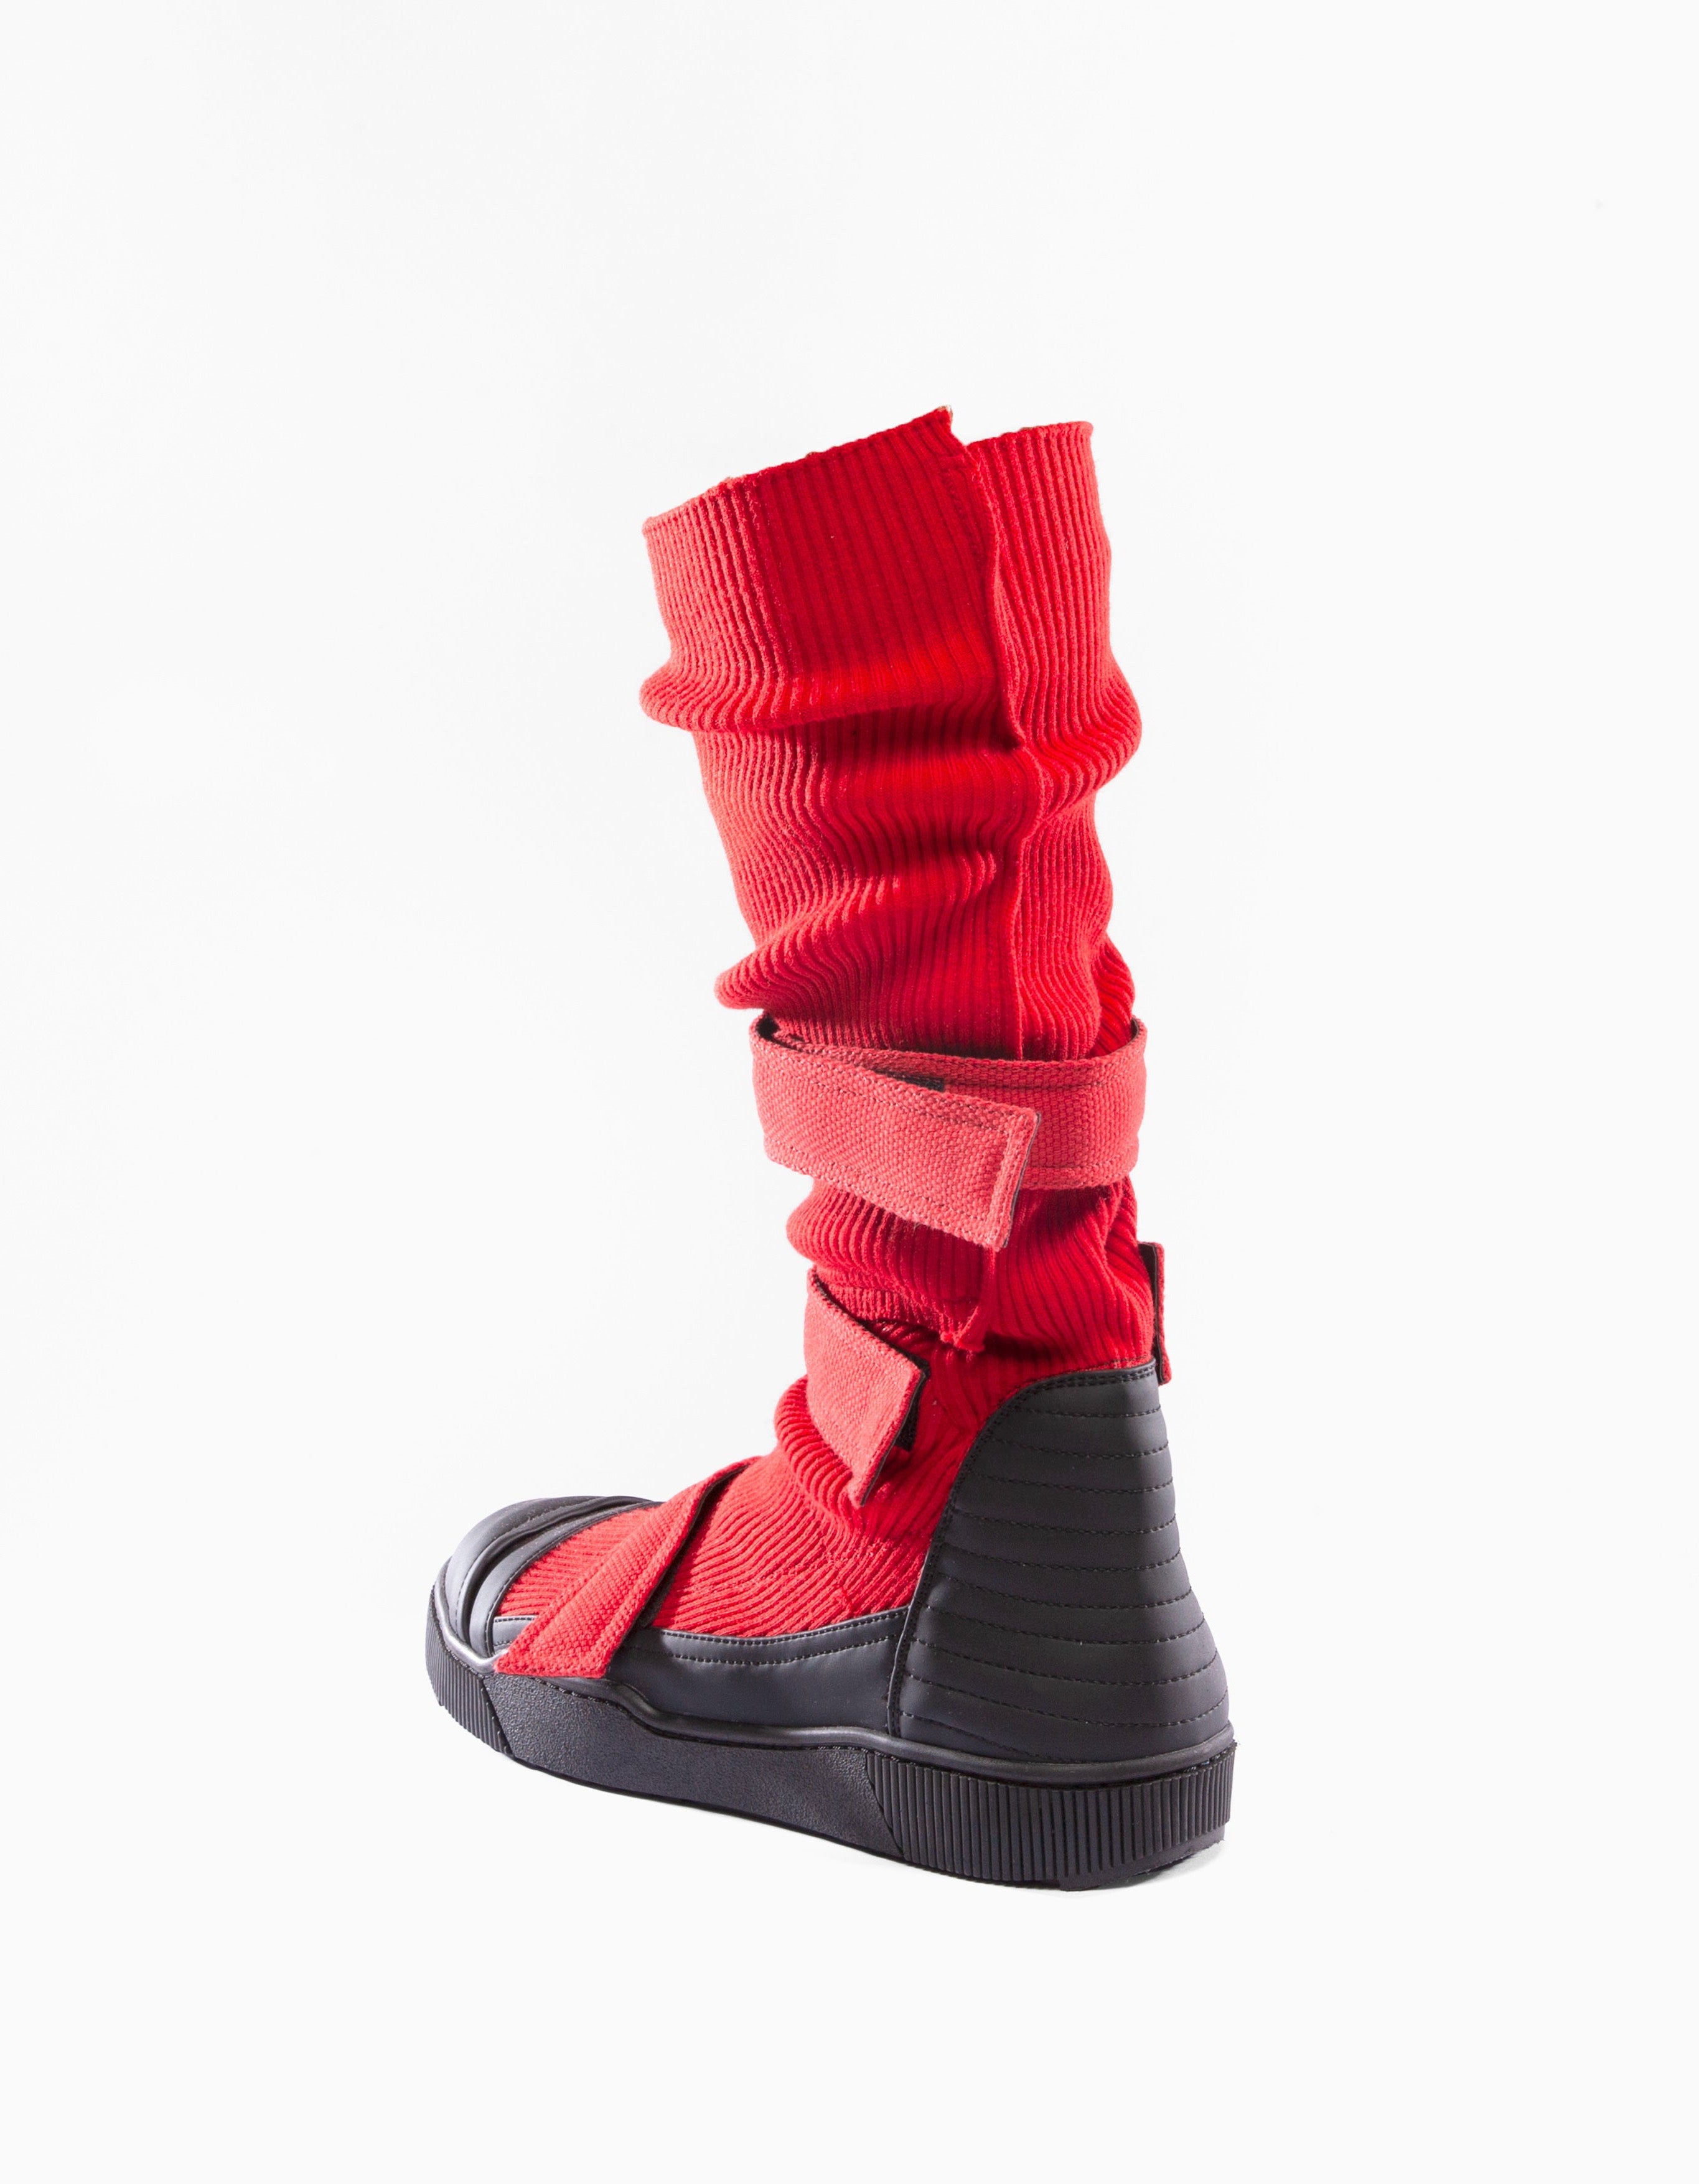 RIB BOOTS RED BAND M